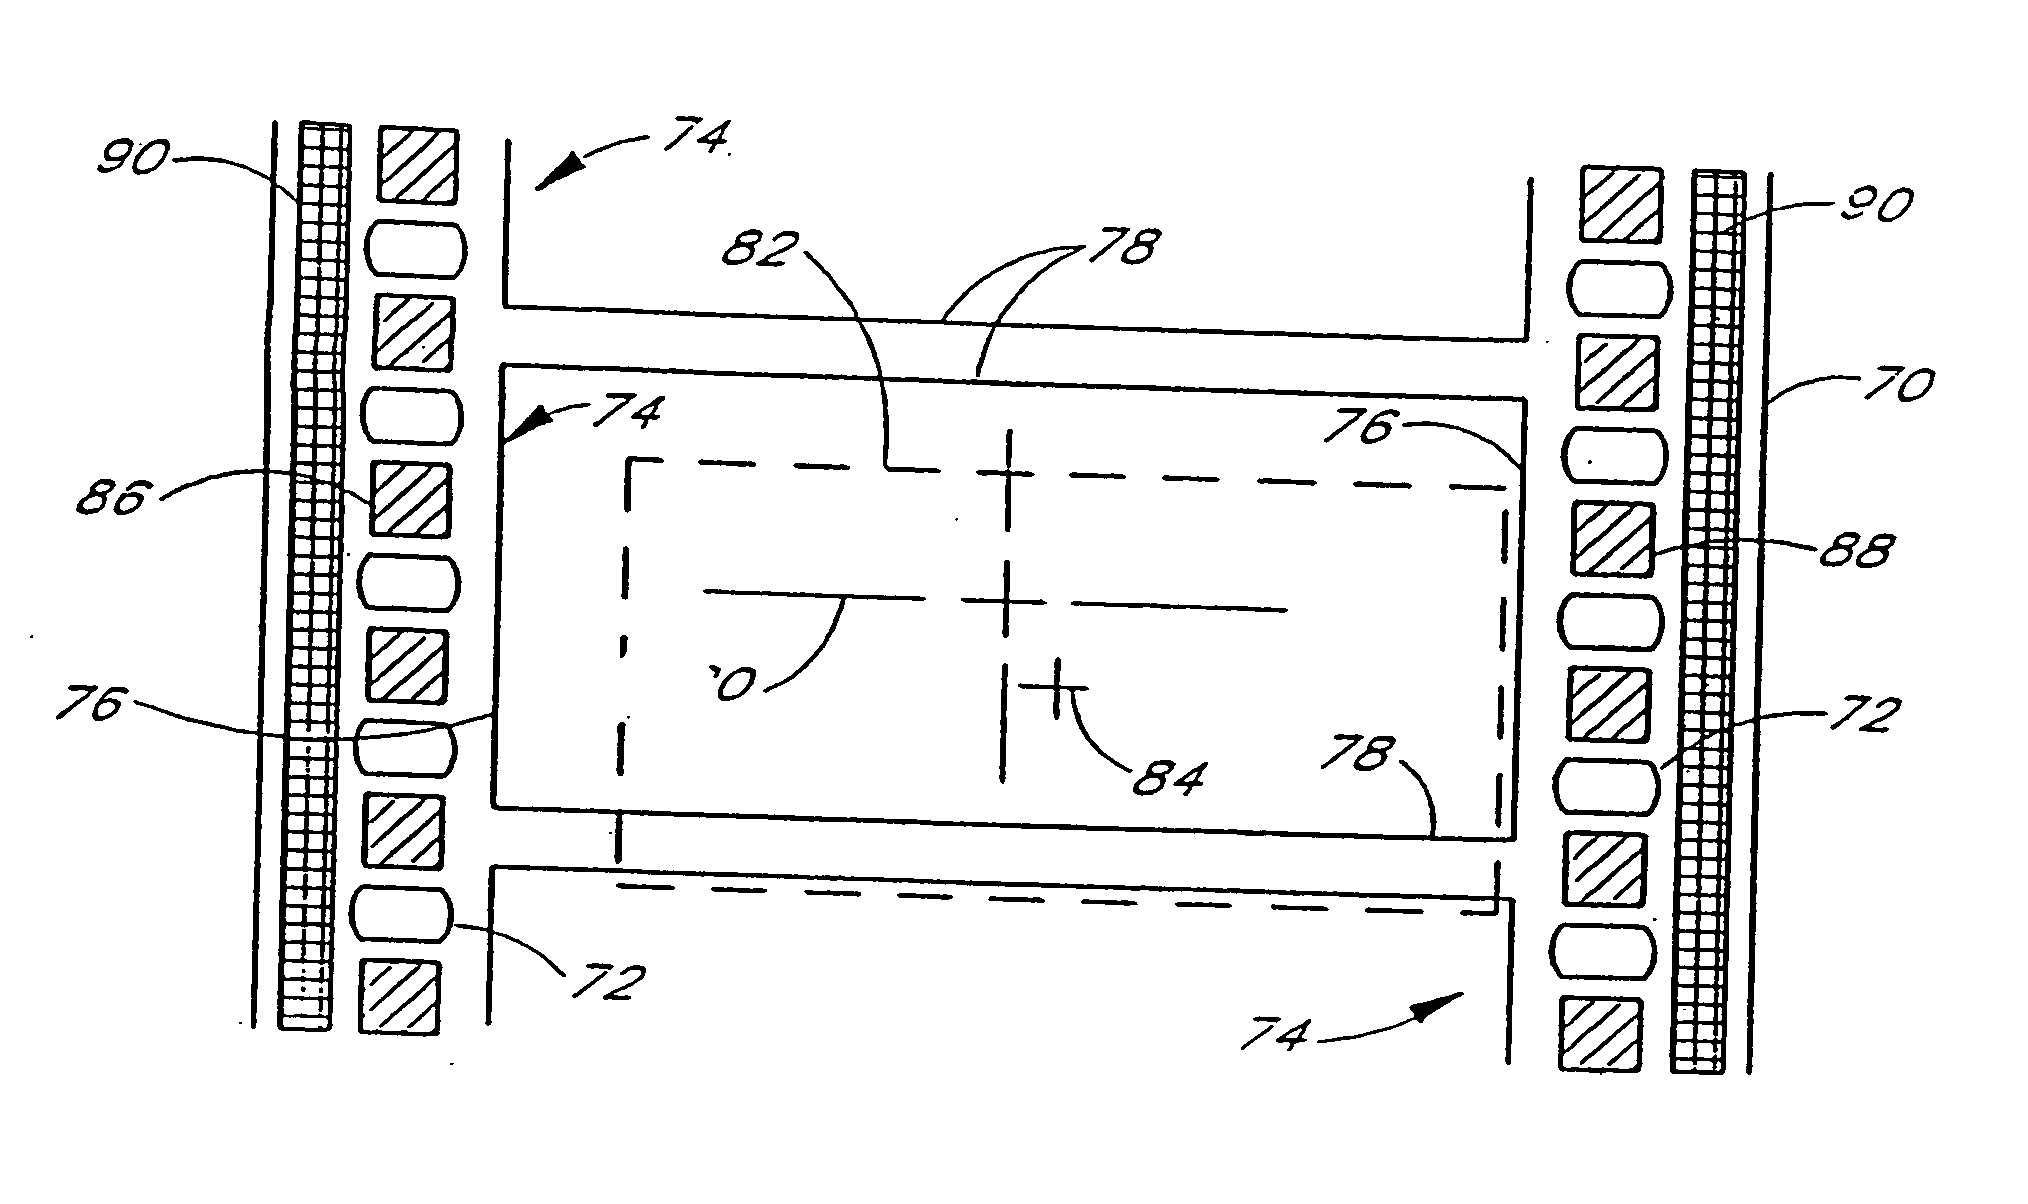 Method of making motion picture release-print film